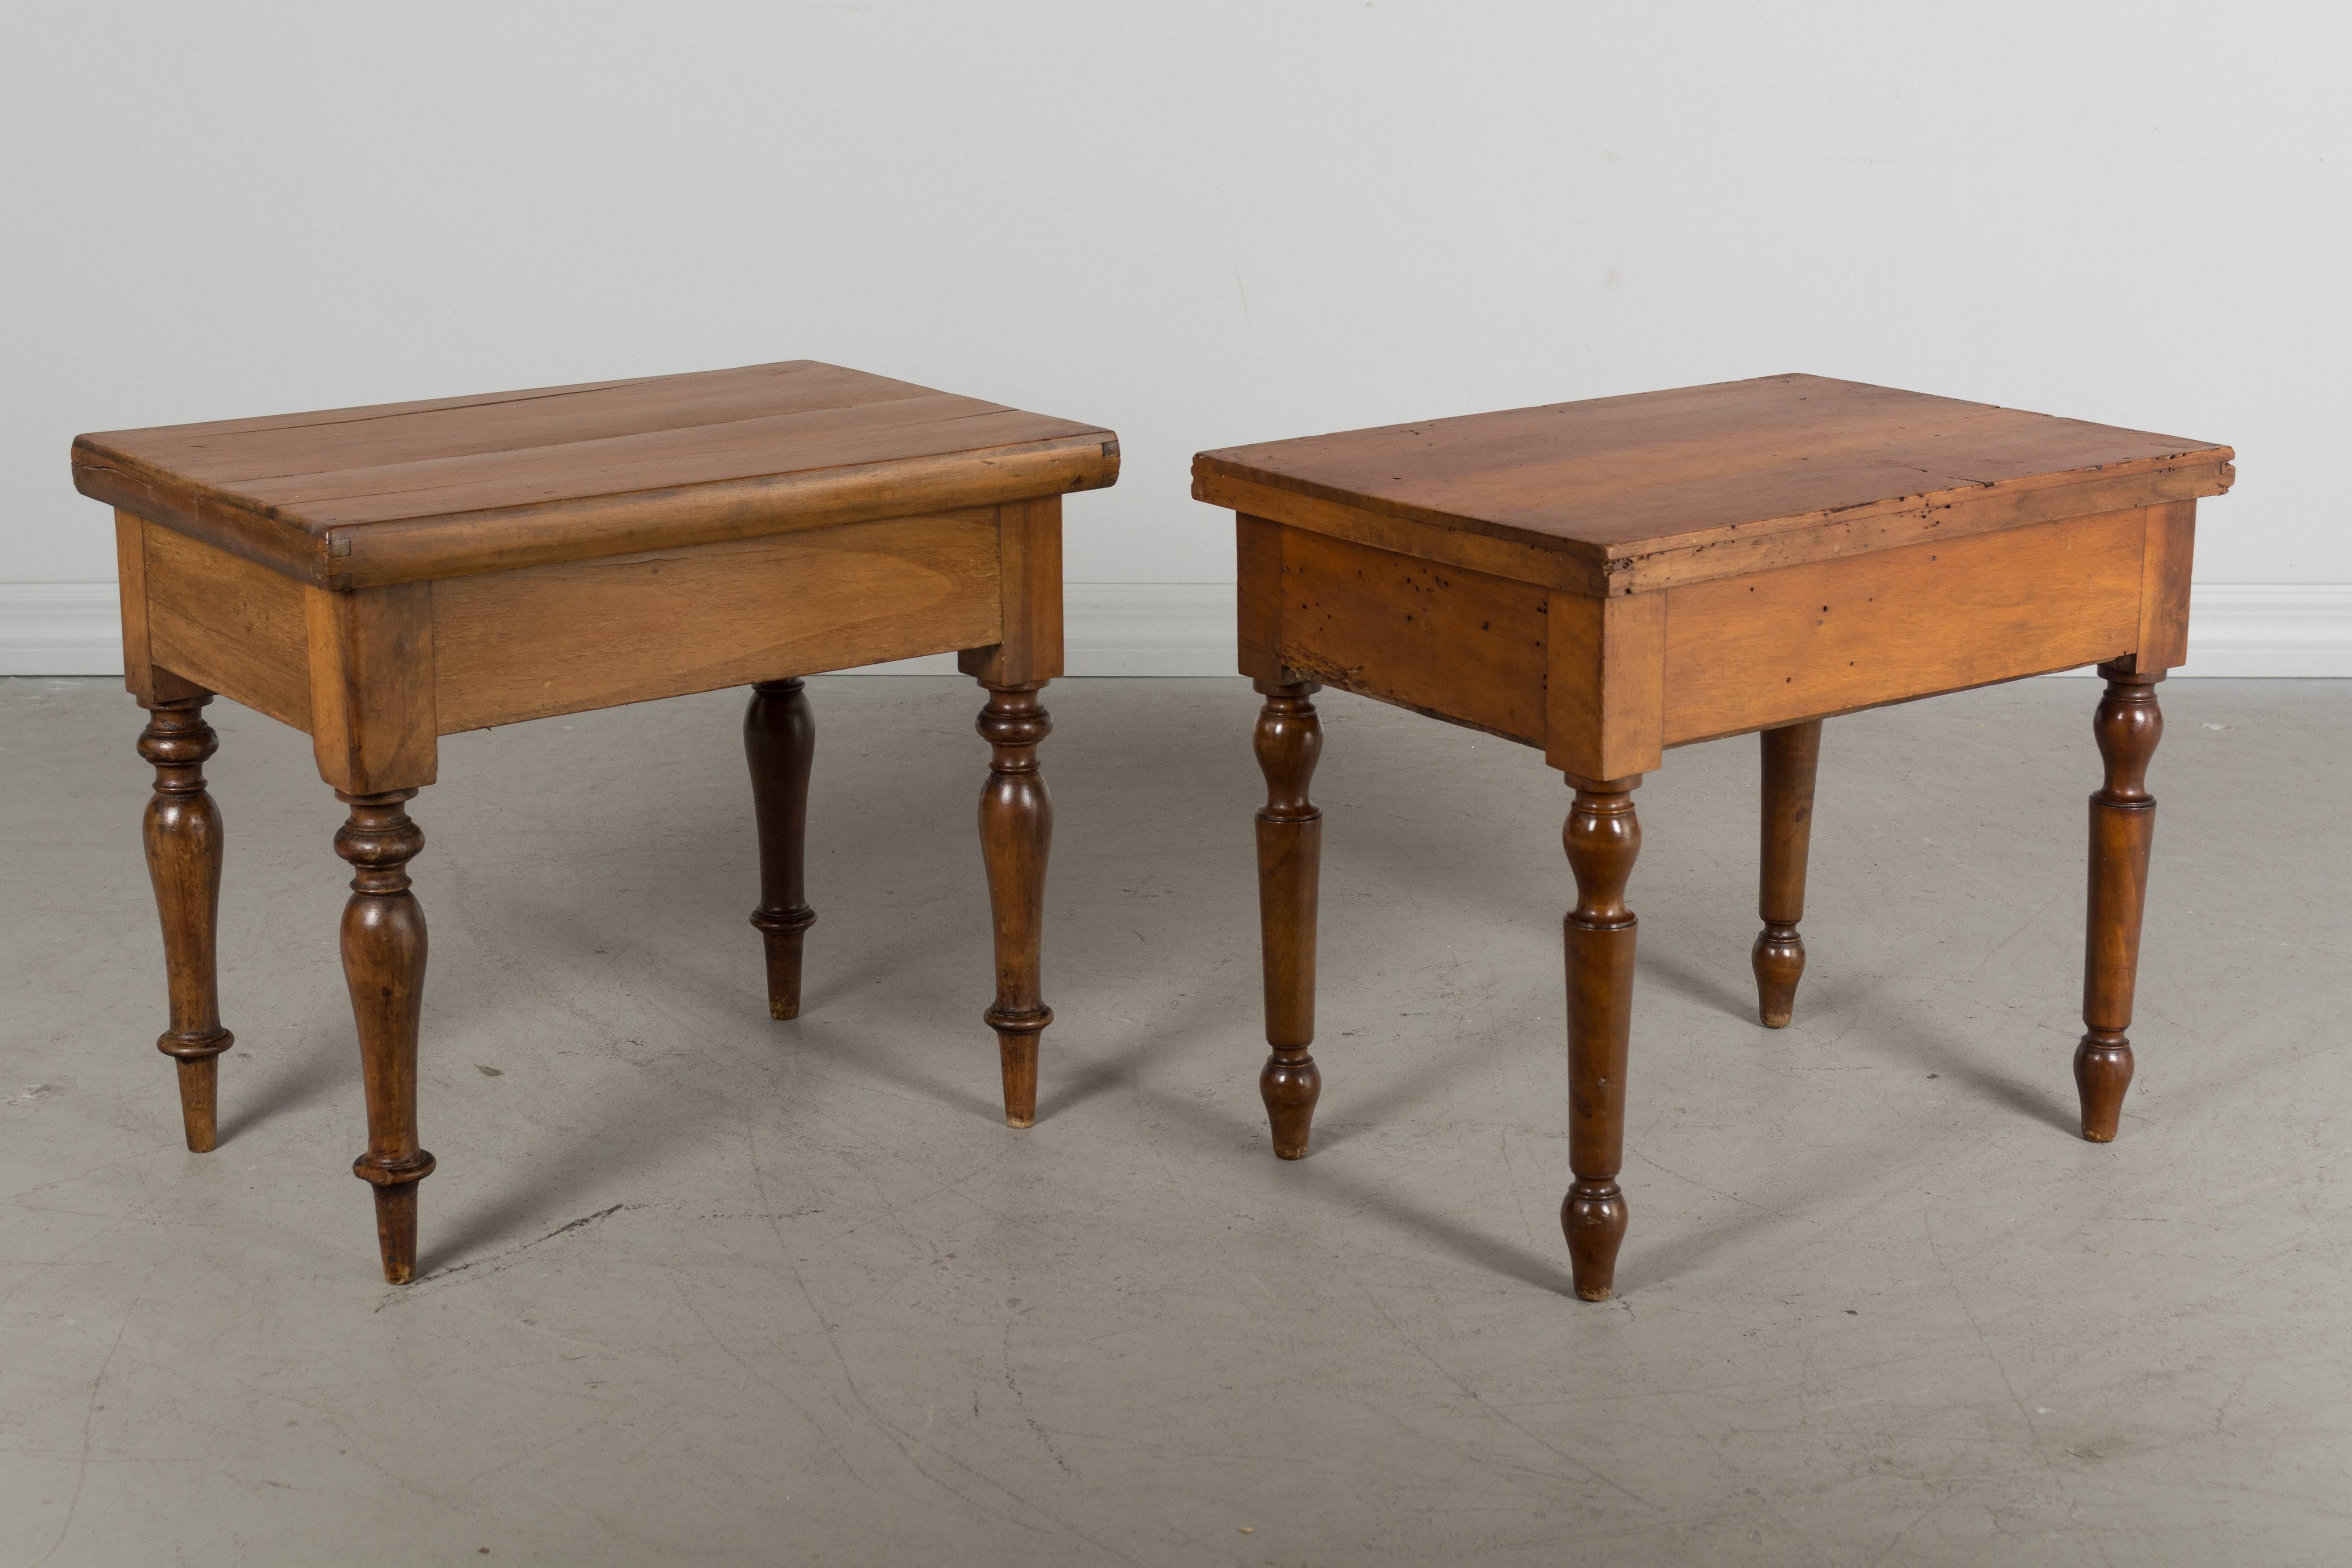 A pair of small French Louis Philippe tables with removable tops made of cherrywood. Originally these were children's potty chairs, having zinc interiors that would have held porcelain bowls. May be repurposed as planters or used as small tables or